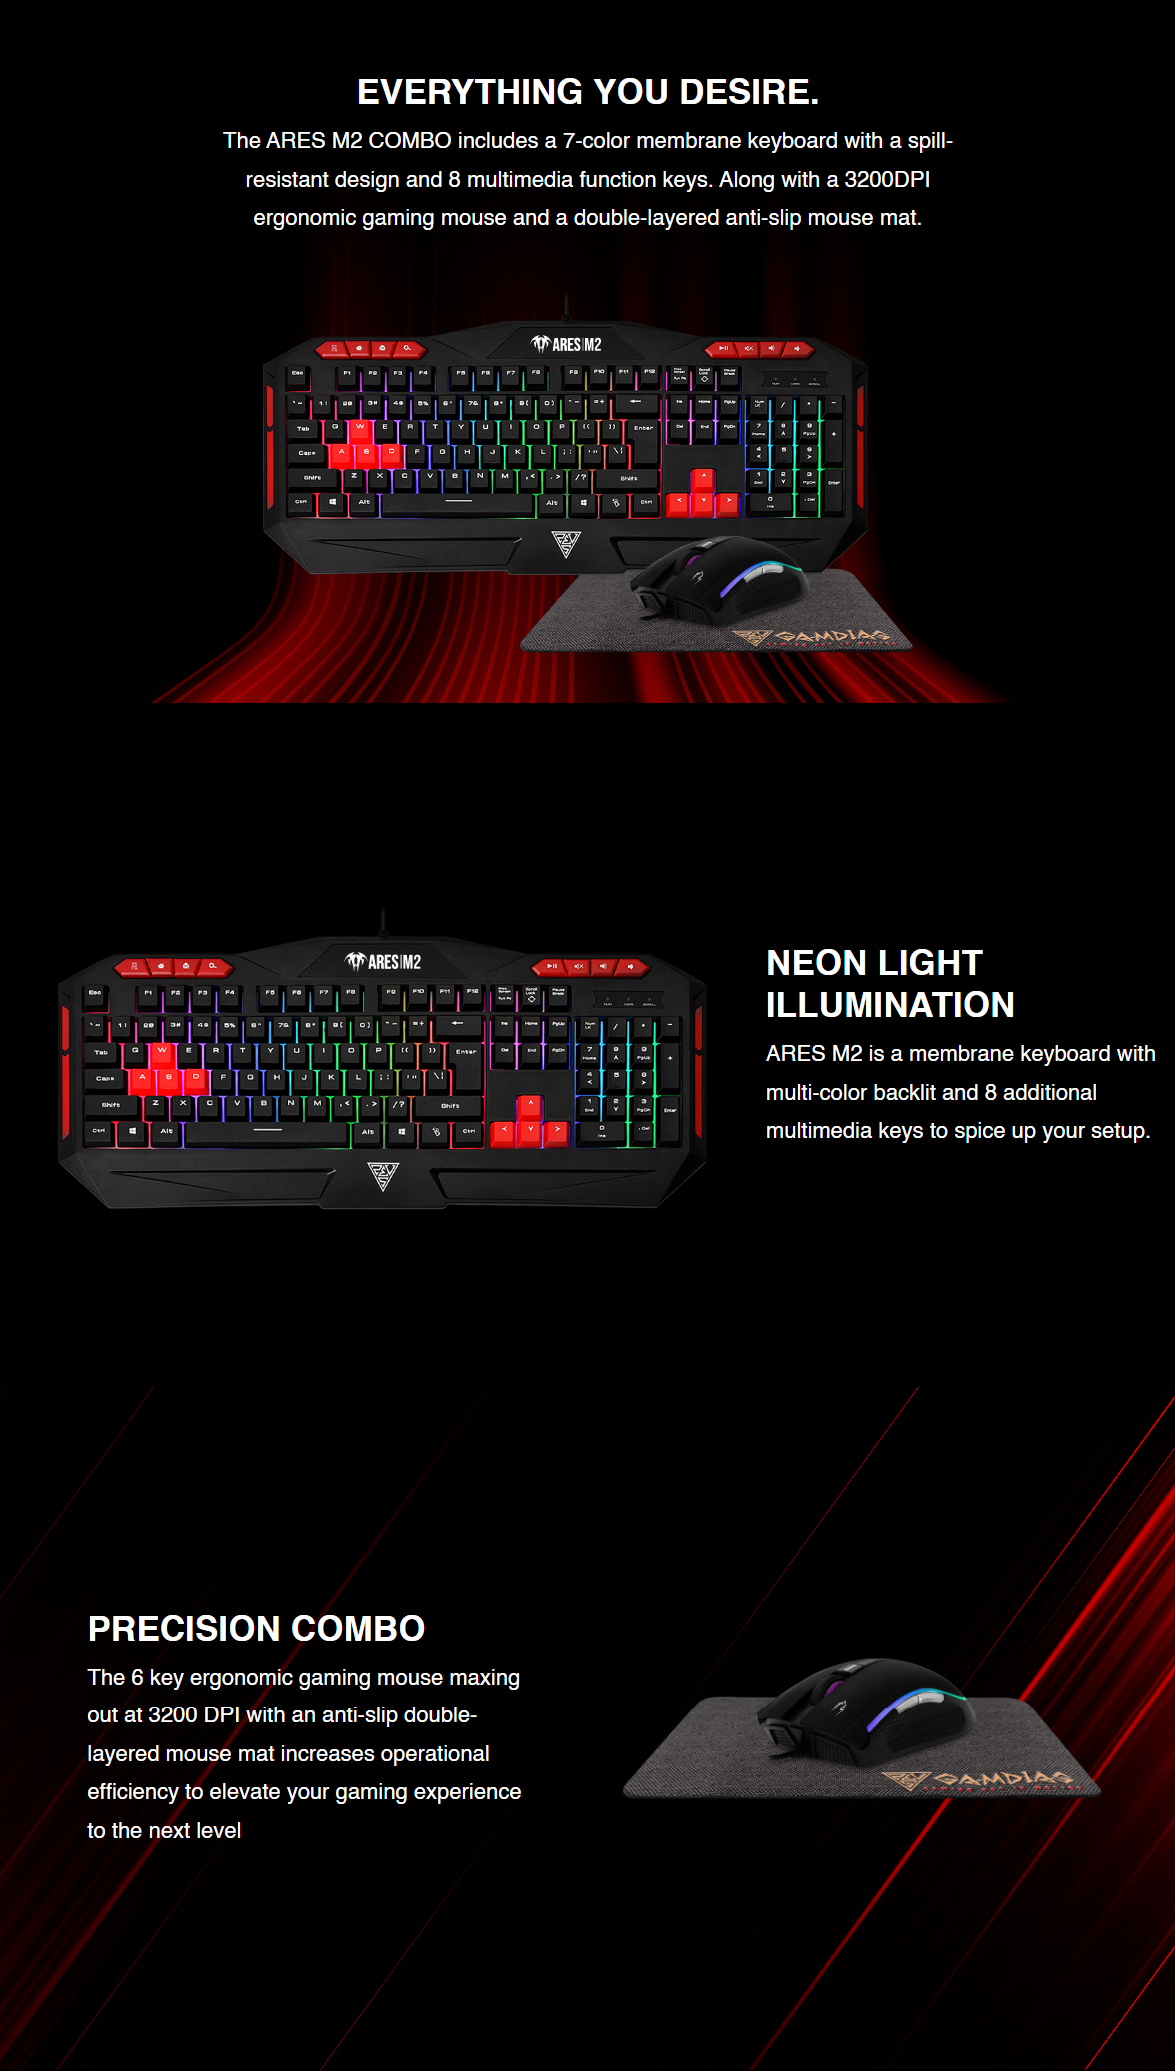 Keyboard-Mouse-Combos-Gamdias-ARES-M2-3-In-1-Gaming-Combo-2